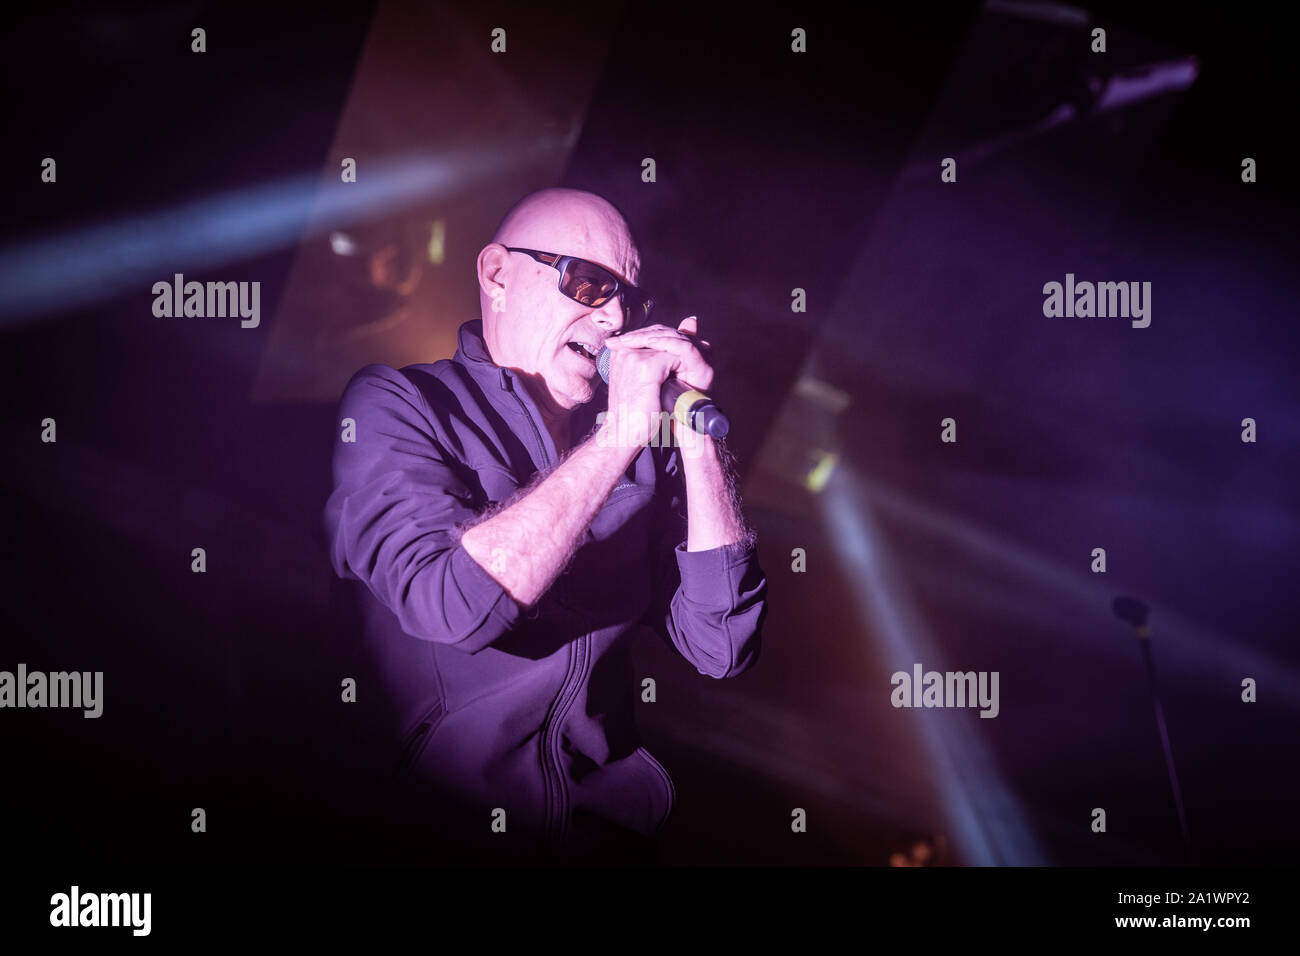 Oslo, Norway. 28th, September 2019. The English rock band The Sisters of Mercy performs a live concert at Rockefeller in Oslo. Here singer Andrew Eldritch is seen live on stage. (Photo credit: Gonzales Photo - Tord Litleskare). Stock Photo